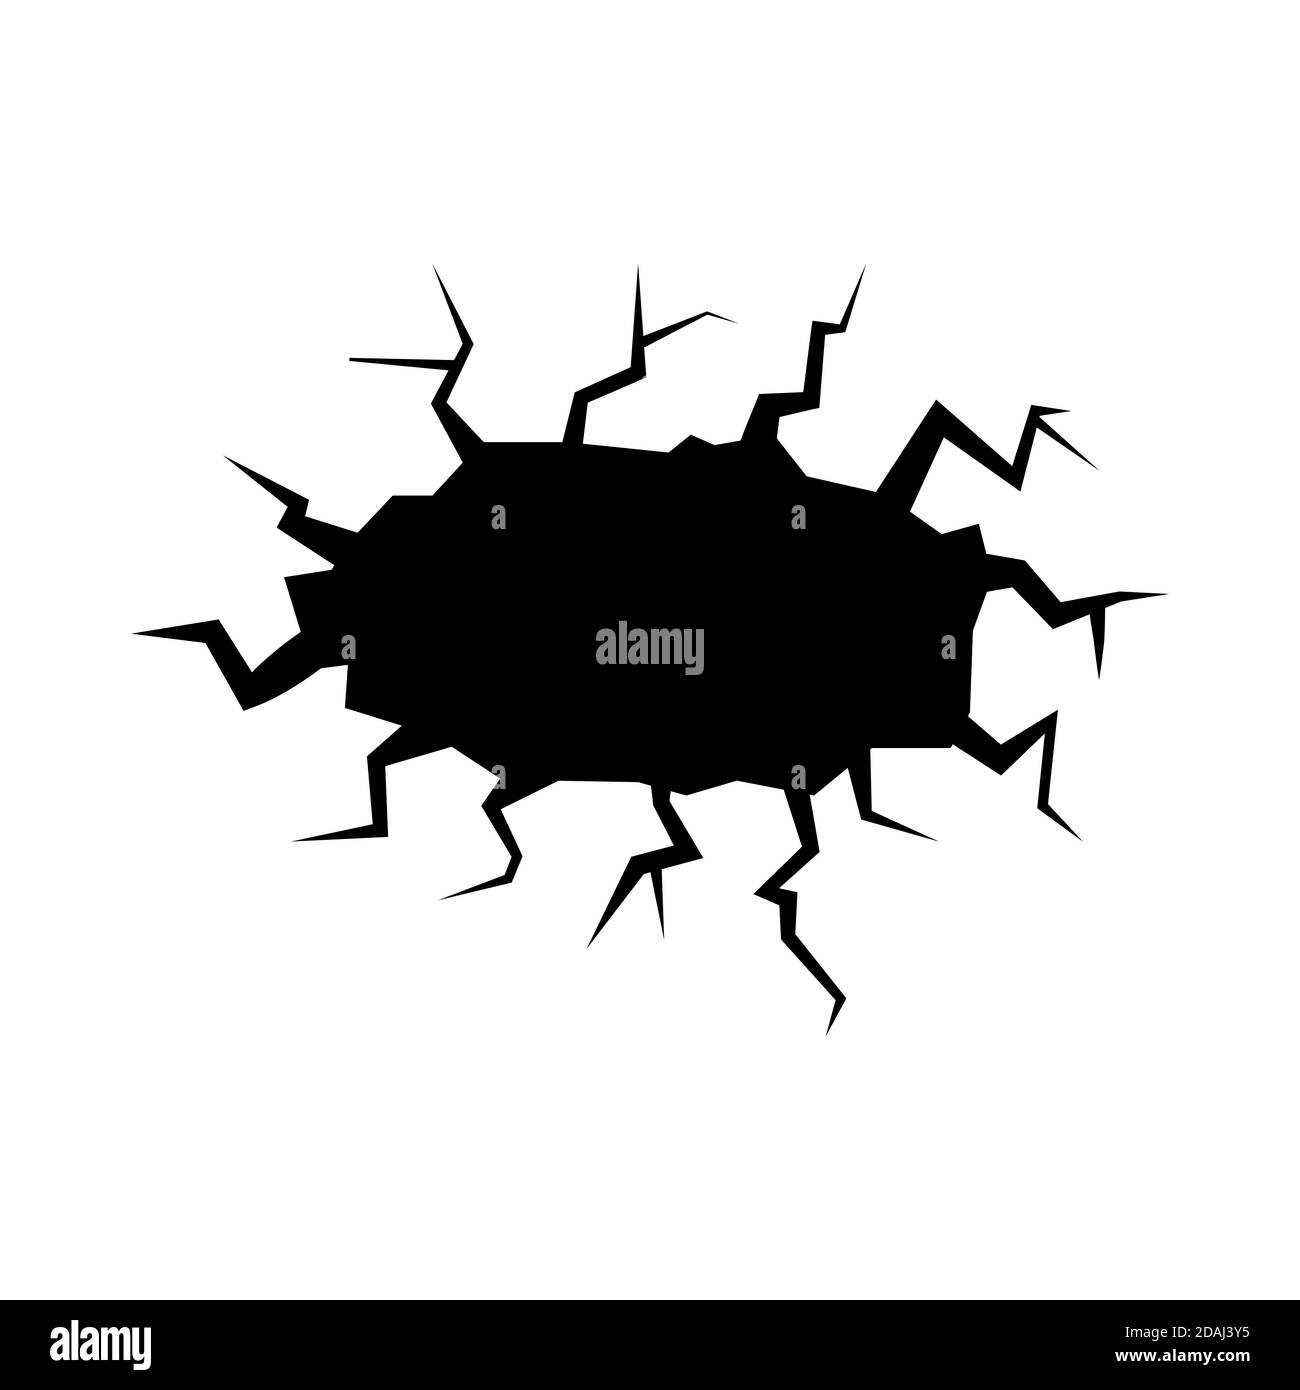 Cracked hole silhouette black color vector illustration Stock Vector